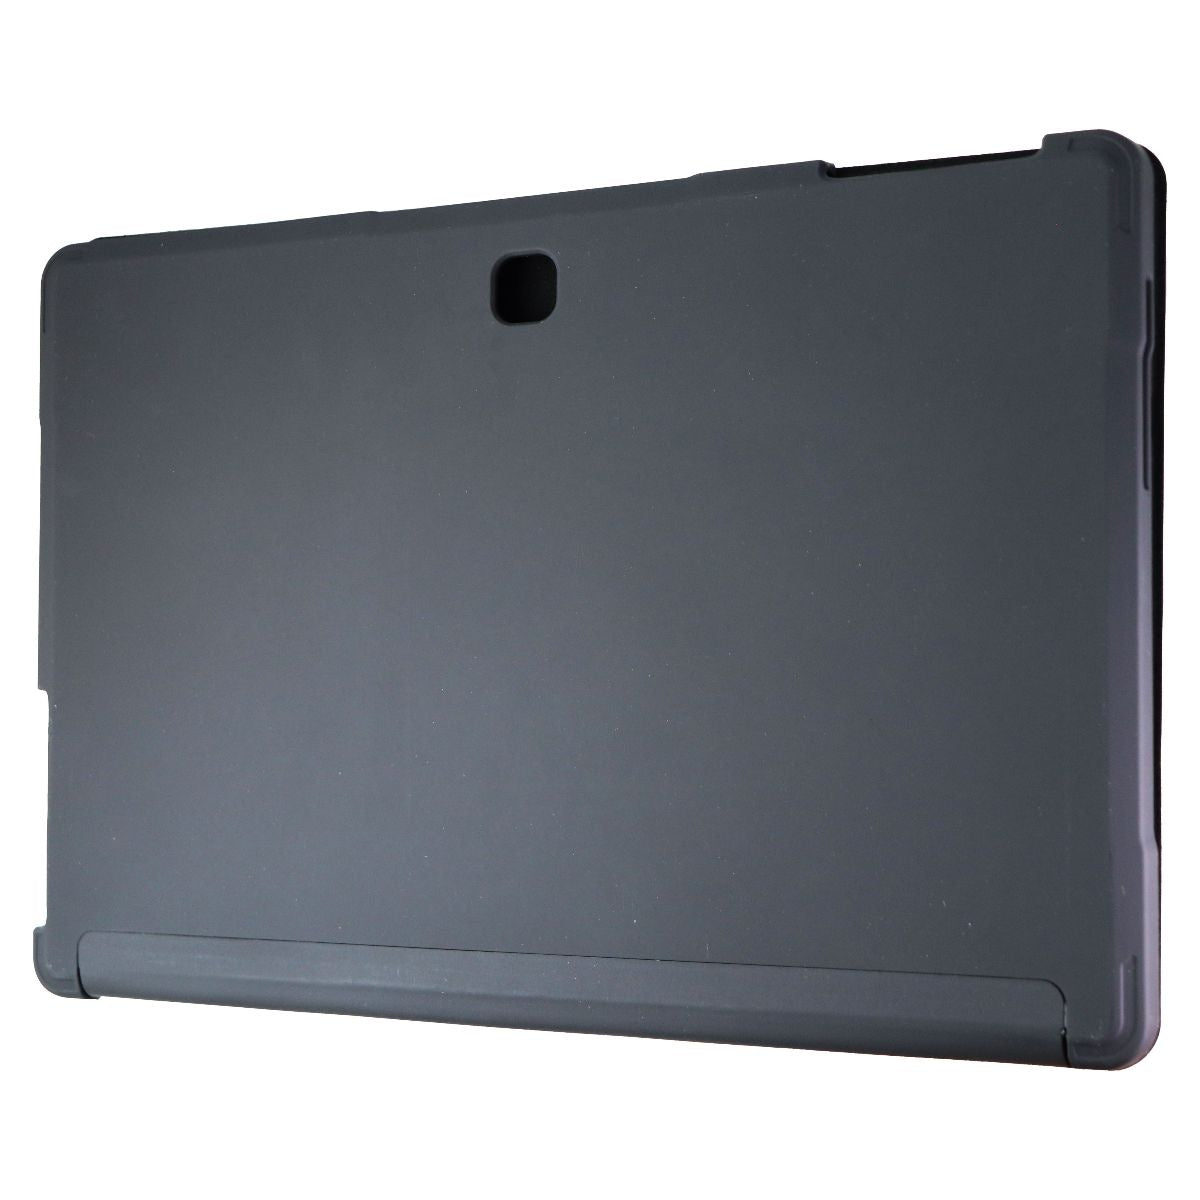 Verizon Hardshell Folio Tablet Case for Samsung Galaxy Book 12-inch - Black iPad/Tablet Accessories - Cases, Covers, Keyboard Folios Verizon    - Simple Cell Bulk Wholesale Pricing - USA Seller